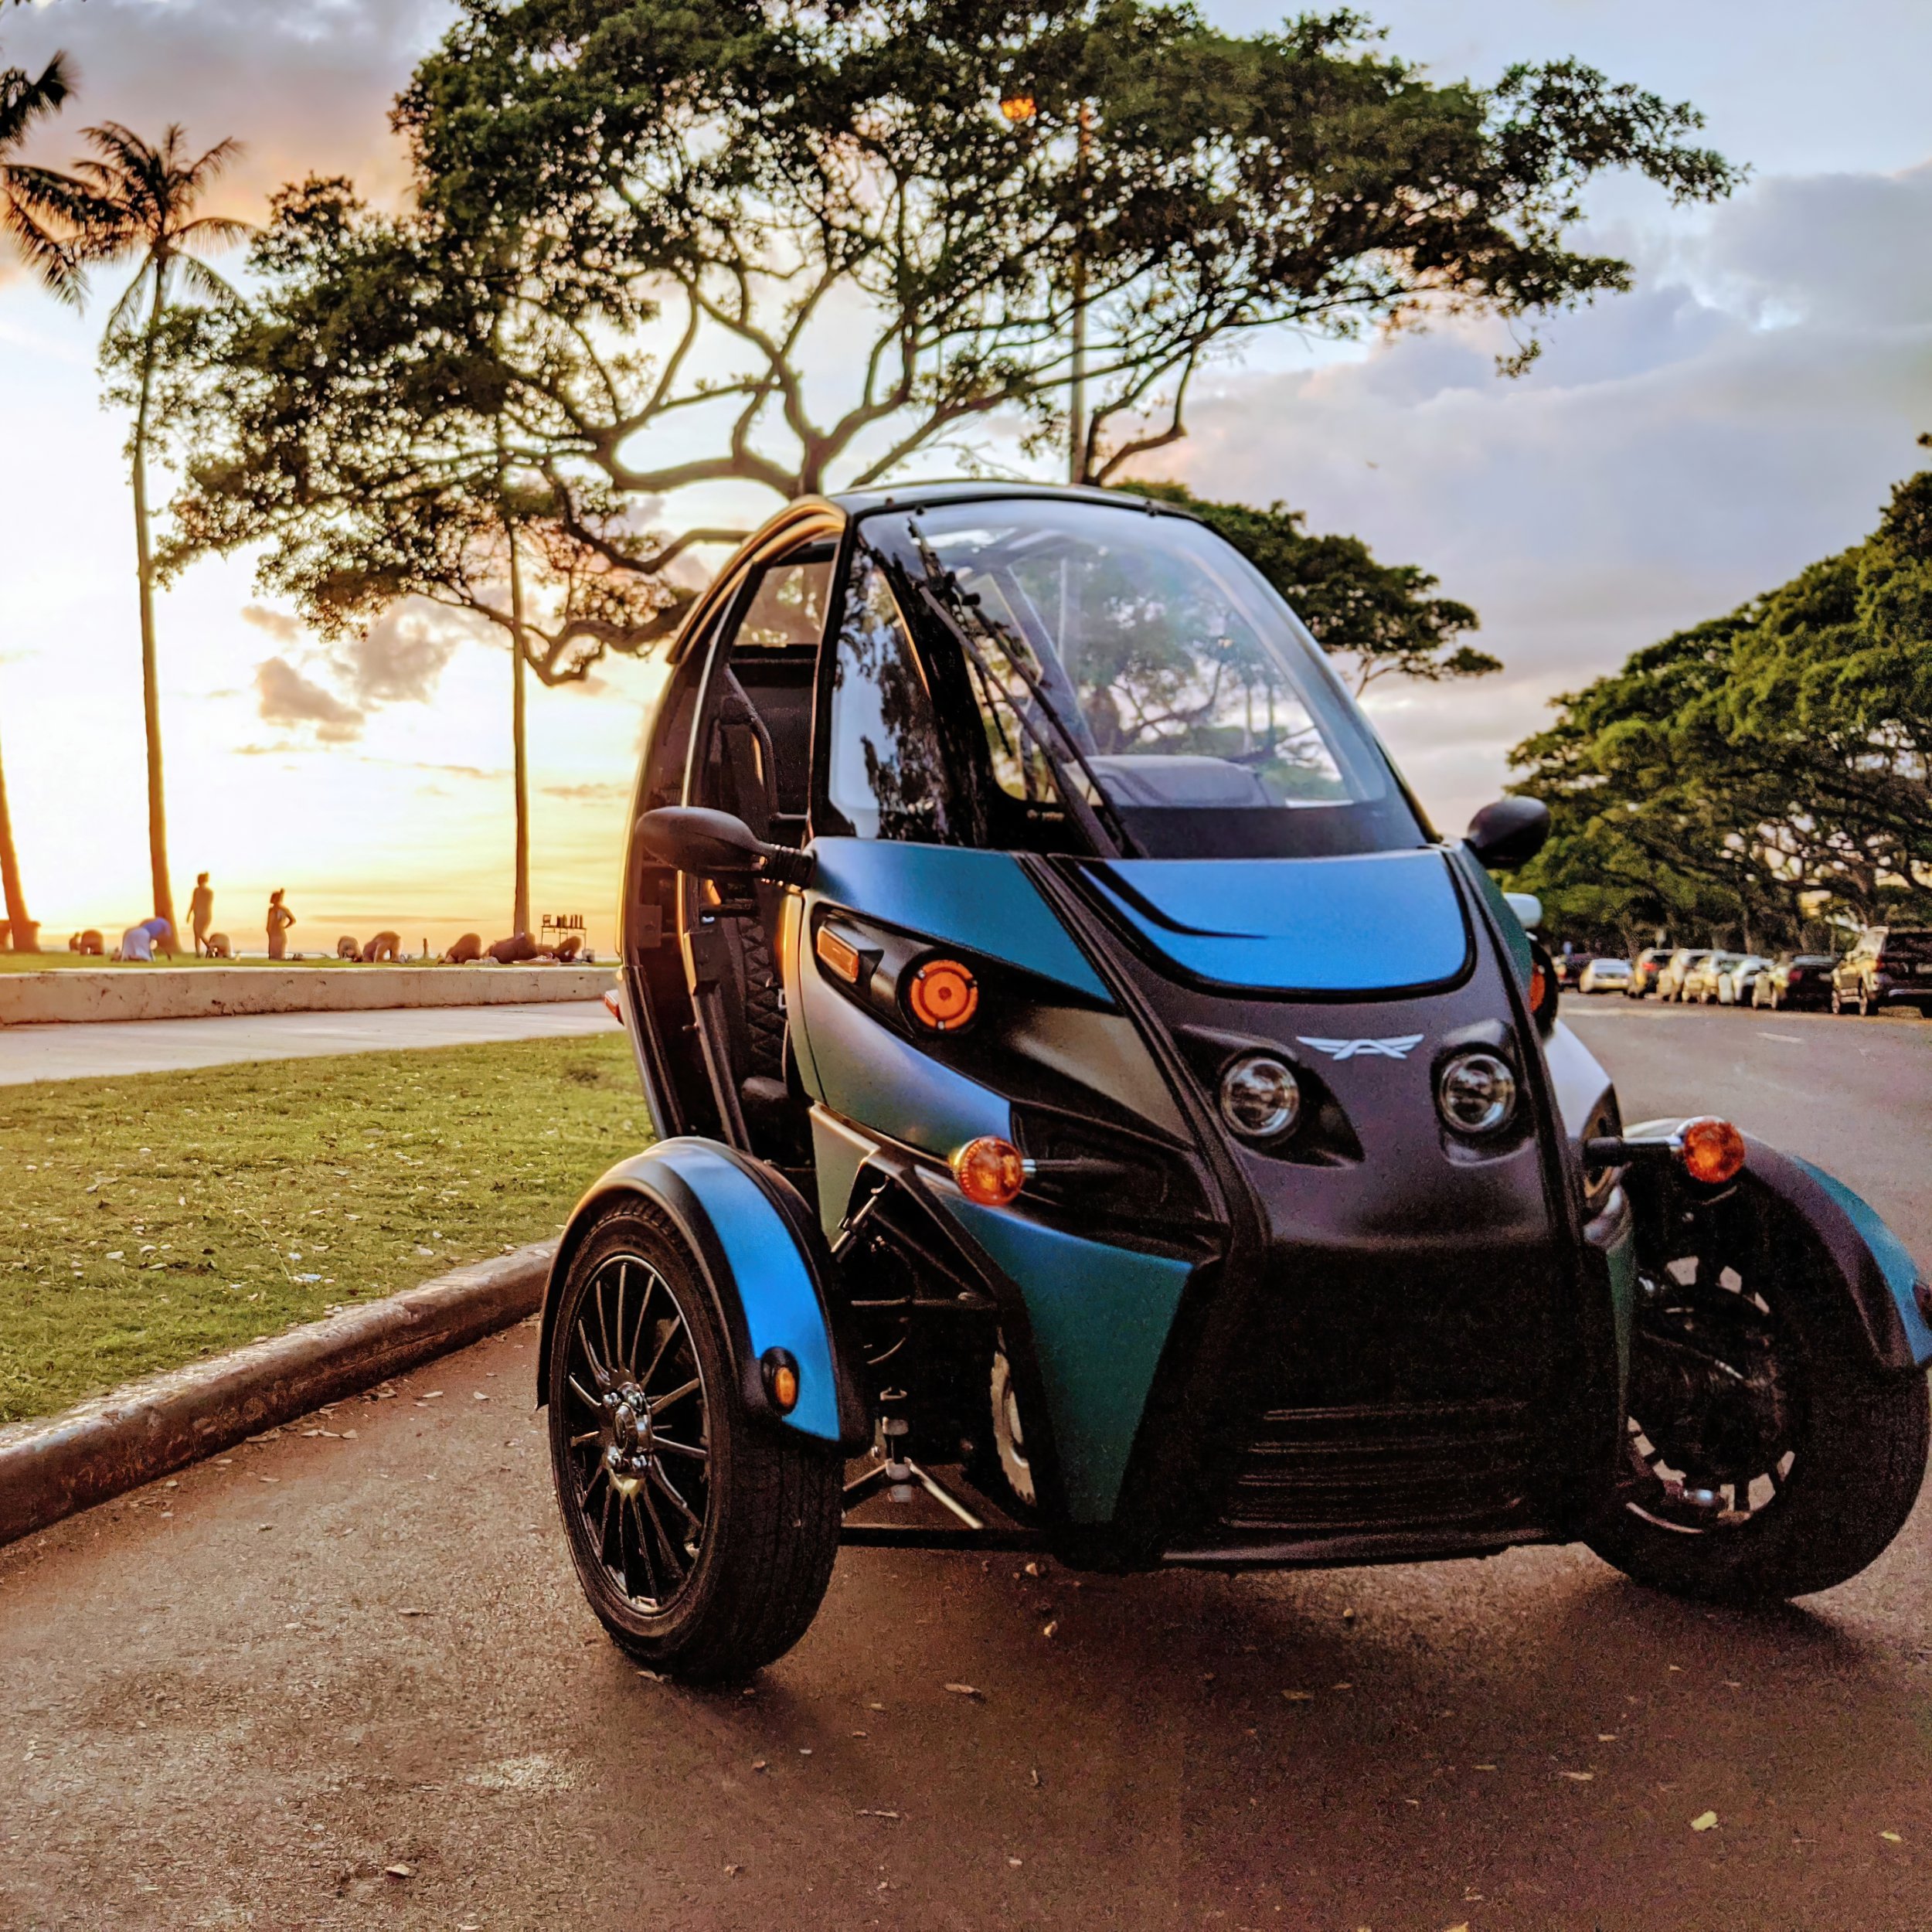  The FUV, or fun utility vehicle, is a beautiful machine designed with a purpose.  The base version is meant for consumers as a clean, affordable alternative to your current mode of transportation. 